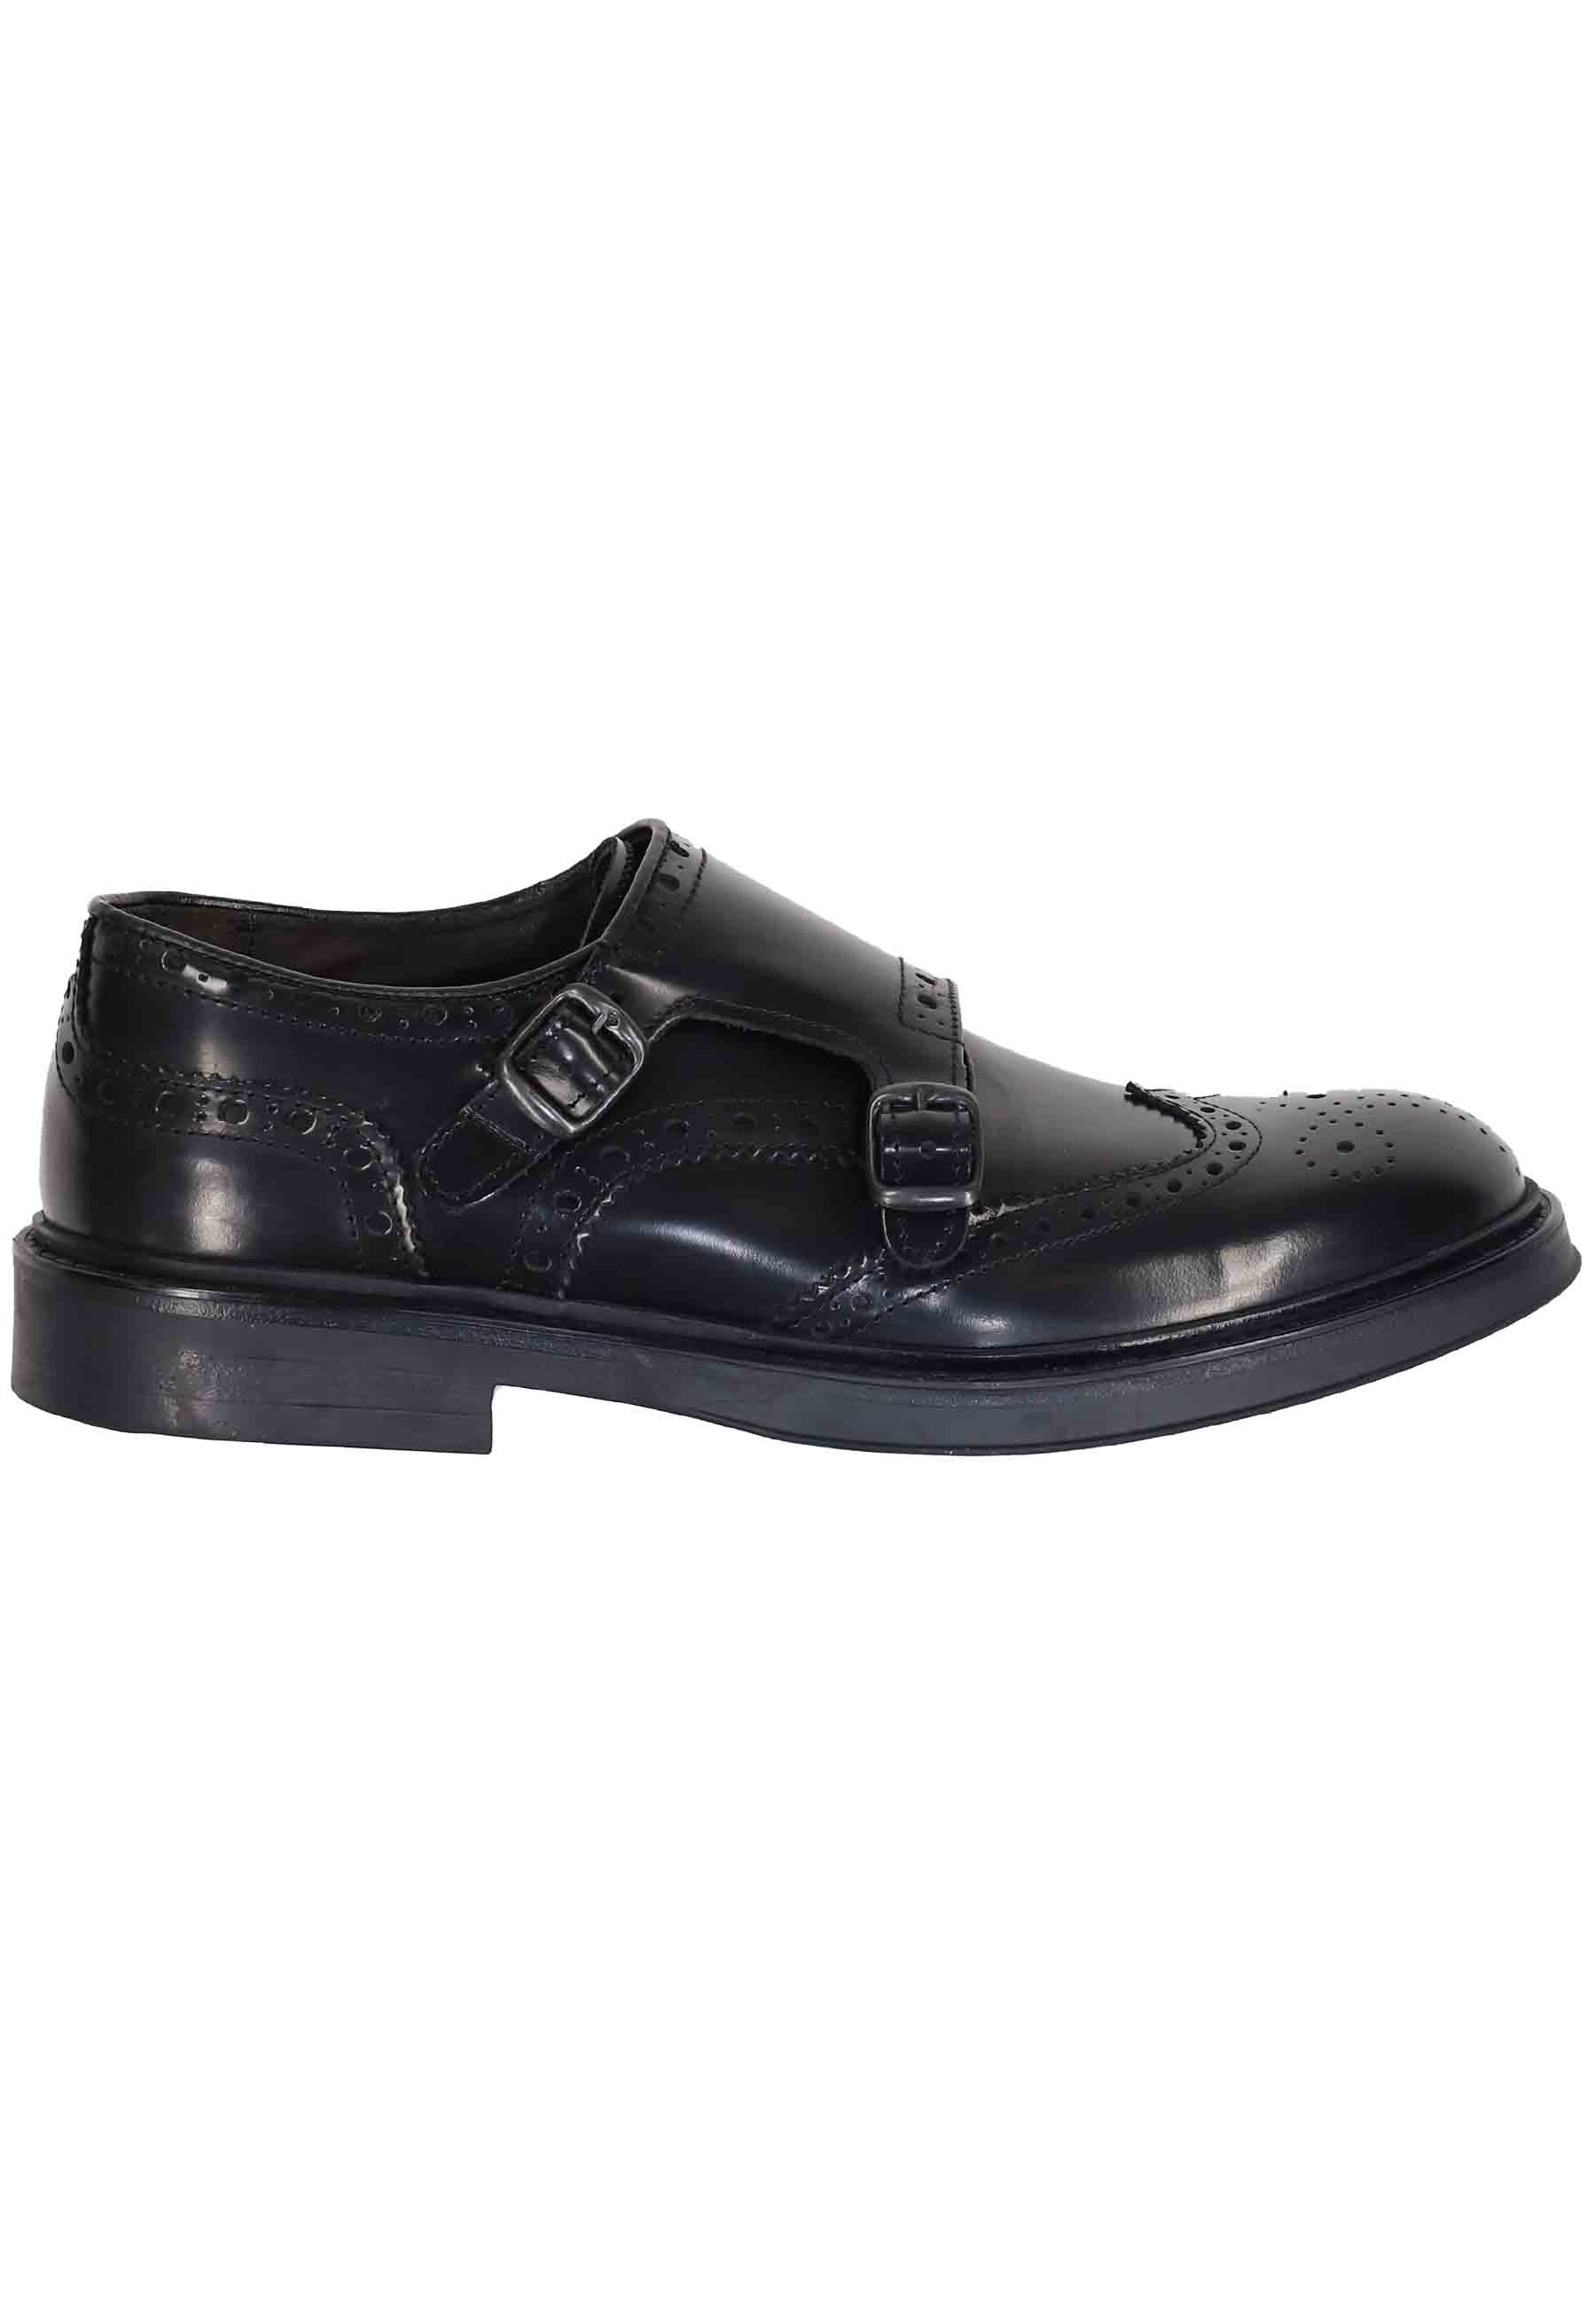 Men's diplomatic loafers in black leather with stitching